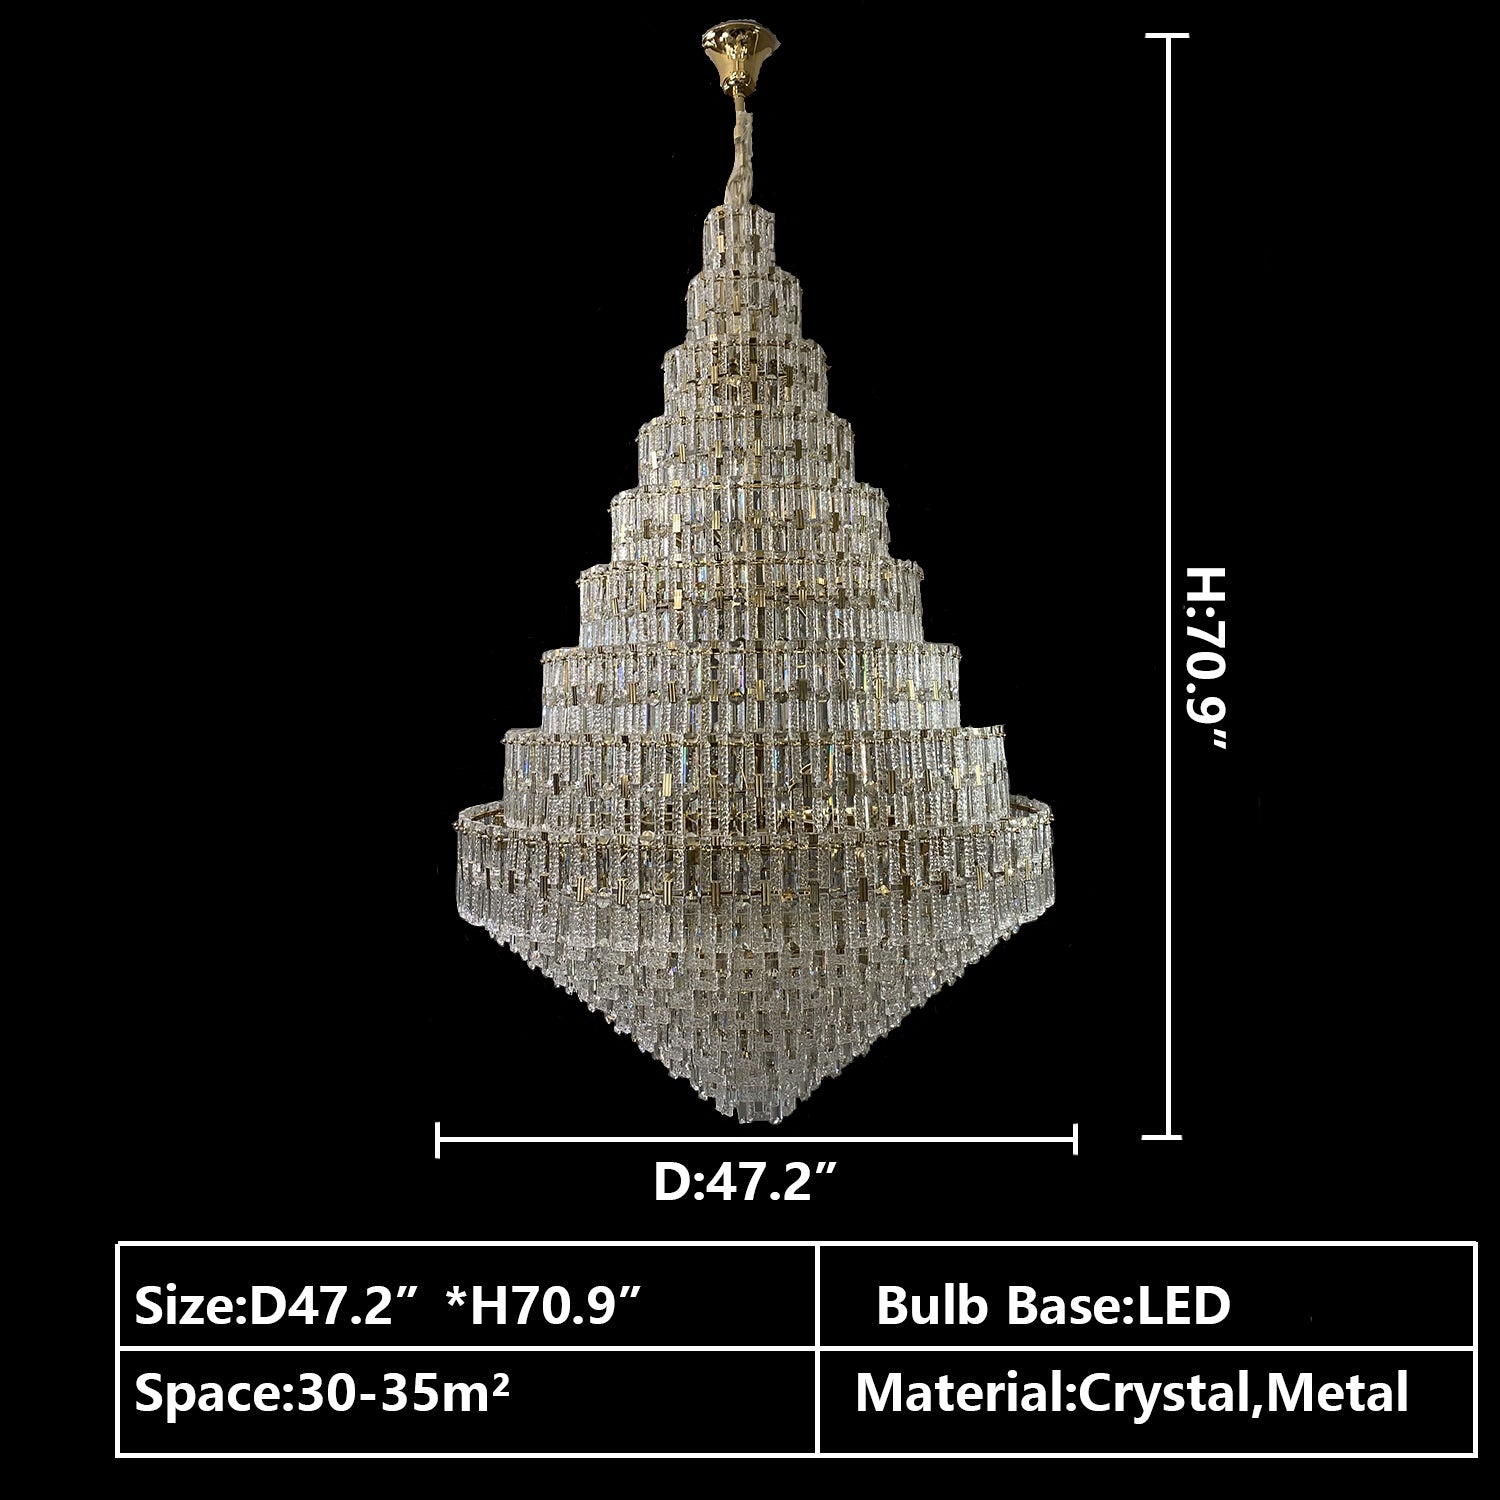 D47.2"*H70.9" chandelier,chandelirs,pendant,lamp,lights,crystal,metal,gold,chrome,tiers,layers,multi-tier,multi-layer,extra large,large,oversized,huge,big,honeycomb,ceiling,living room,dining room,foyer,stairs,entrys,hallway,loft,duplex hall,hotel lobby